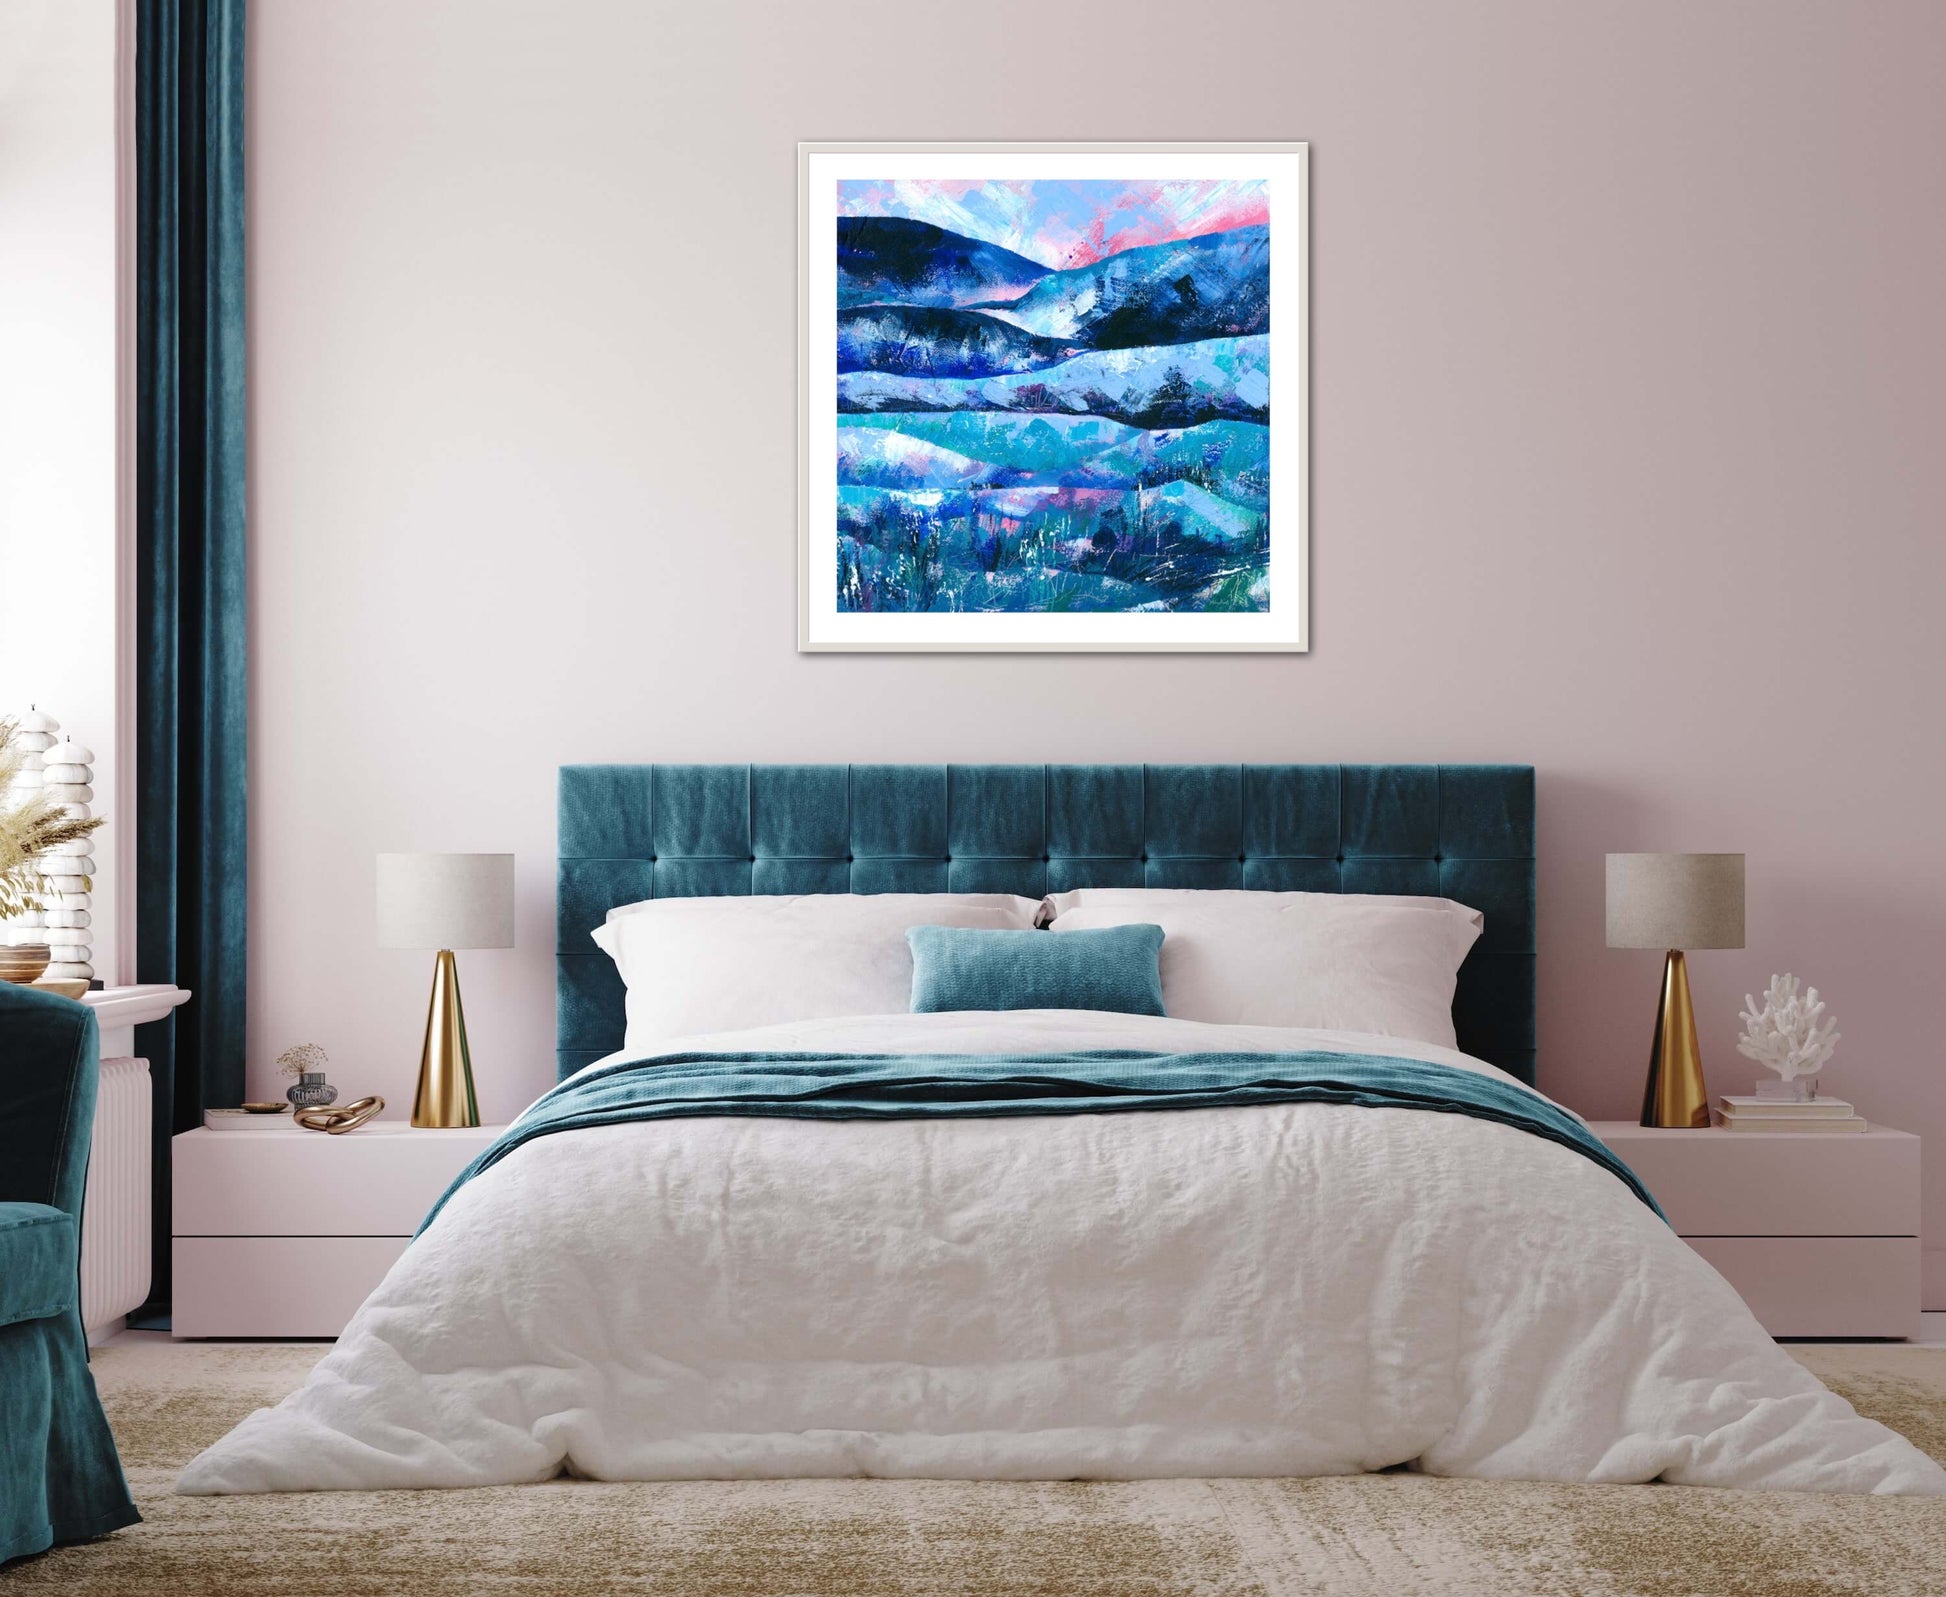 Tranquility abstract landscape painting fine art print displayed in a white frame above a bed in a contemporary pink and teal bedroom